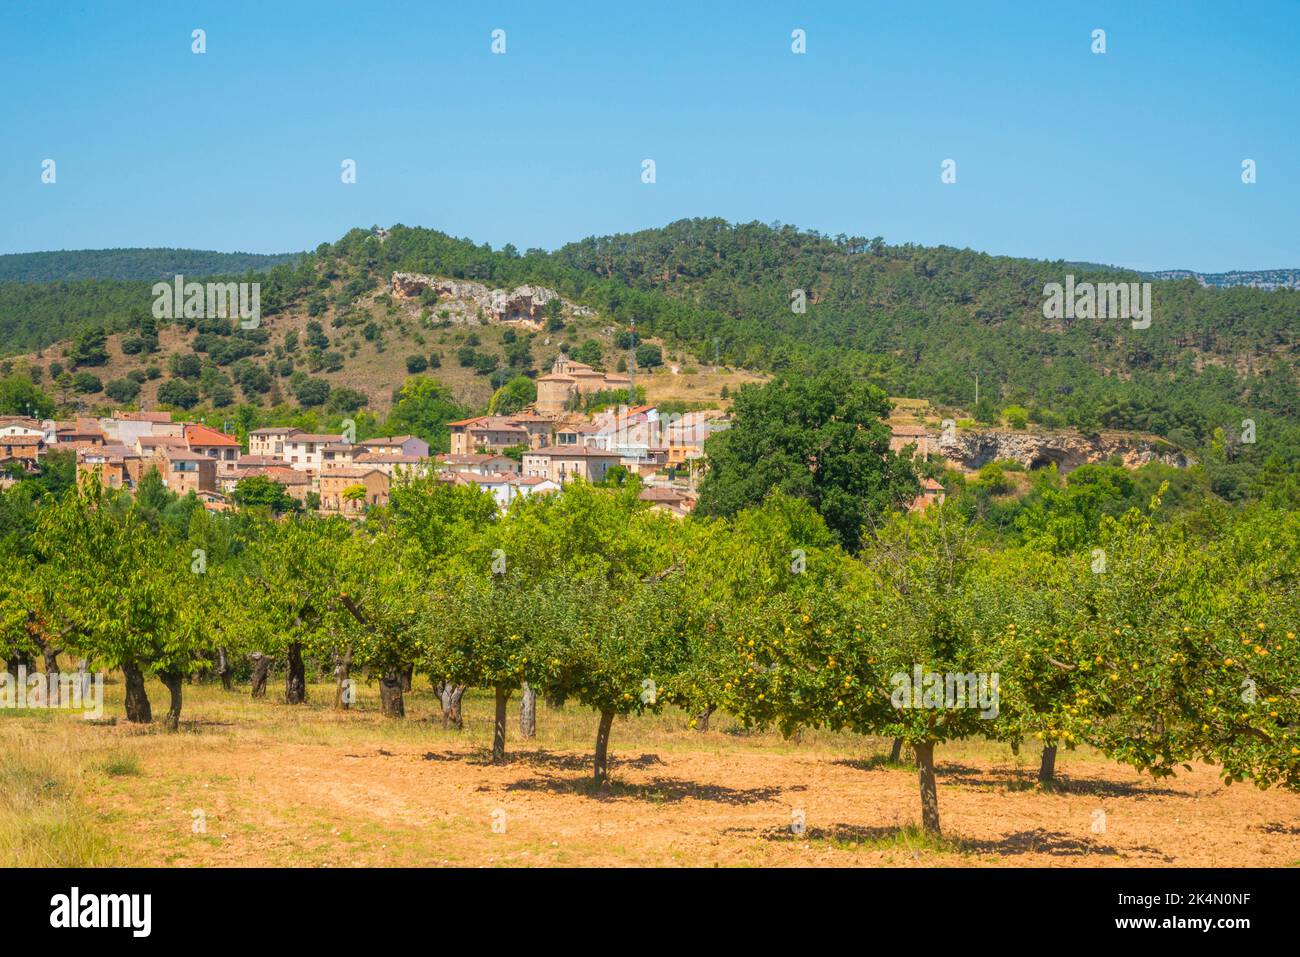 Apple trees and overview of the village. Aguas Candidas, Burgos province, Castilla Leon, Spain. Stock Photo